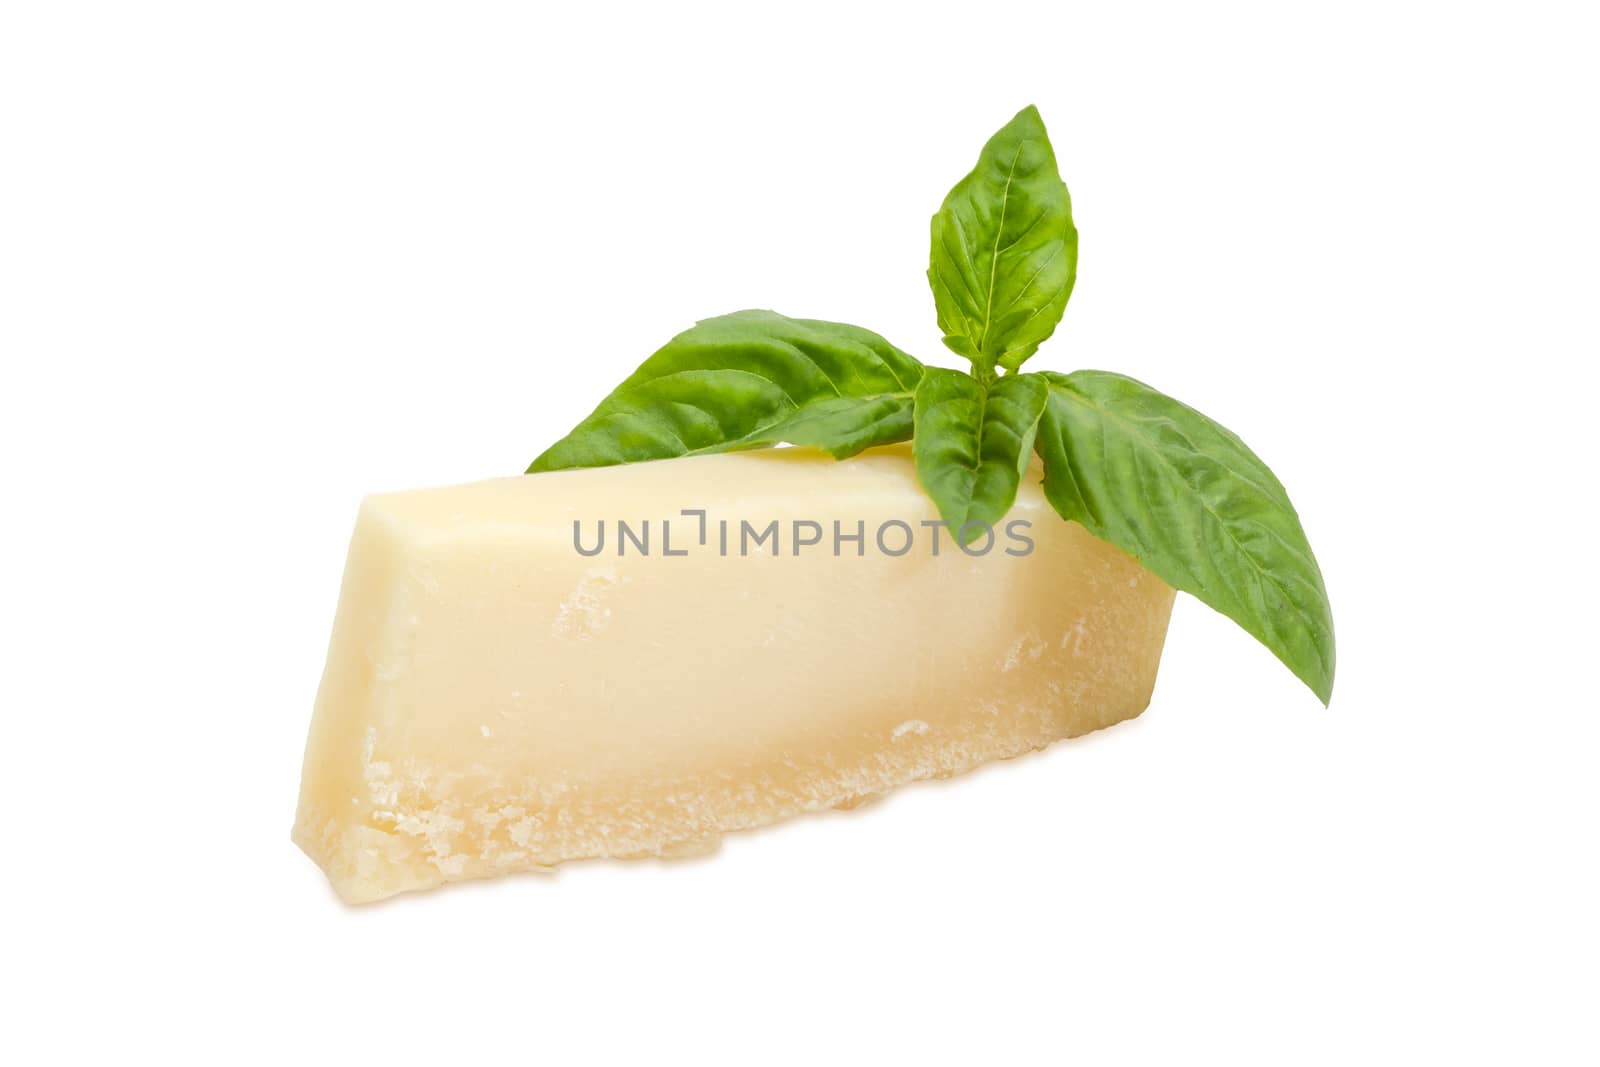 Parmesan cheese with basil twig on a white background by anmbph